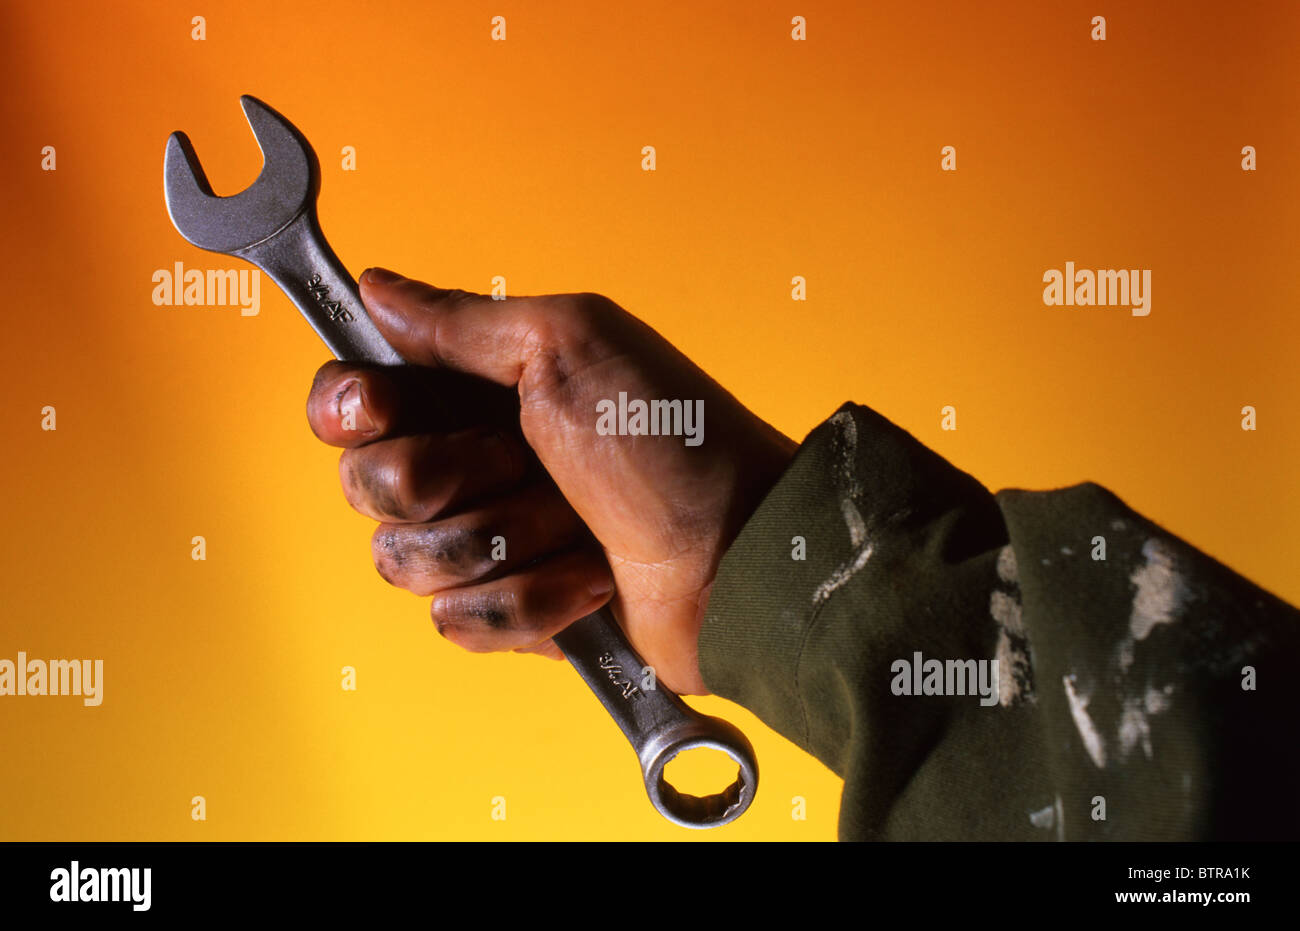 mechanic with oily hand holding spanner Stock Photo